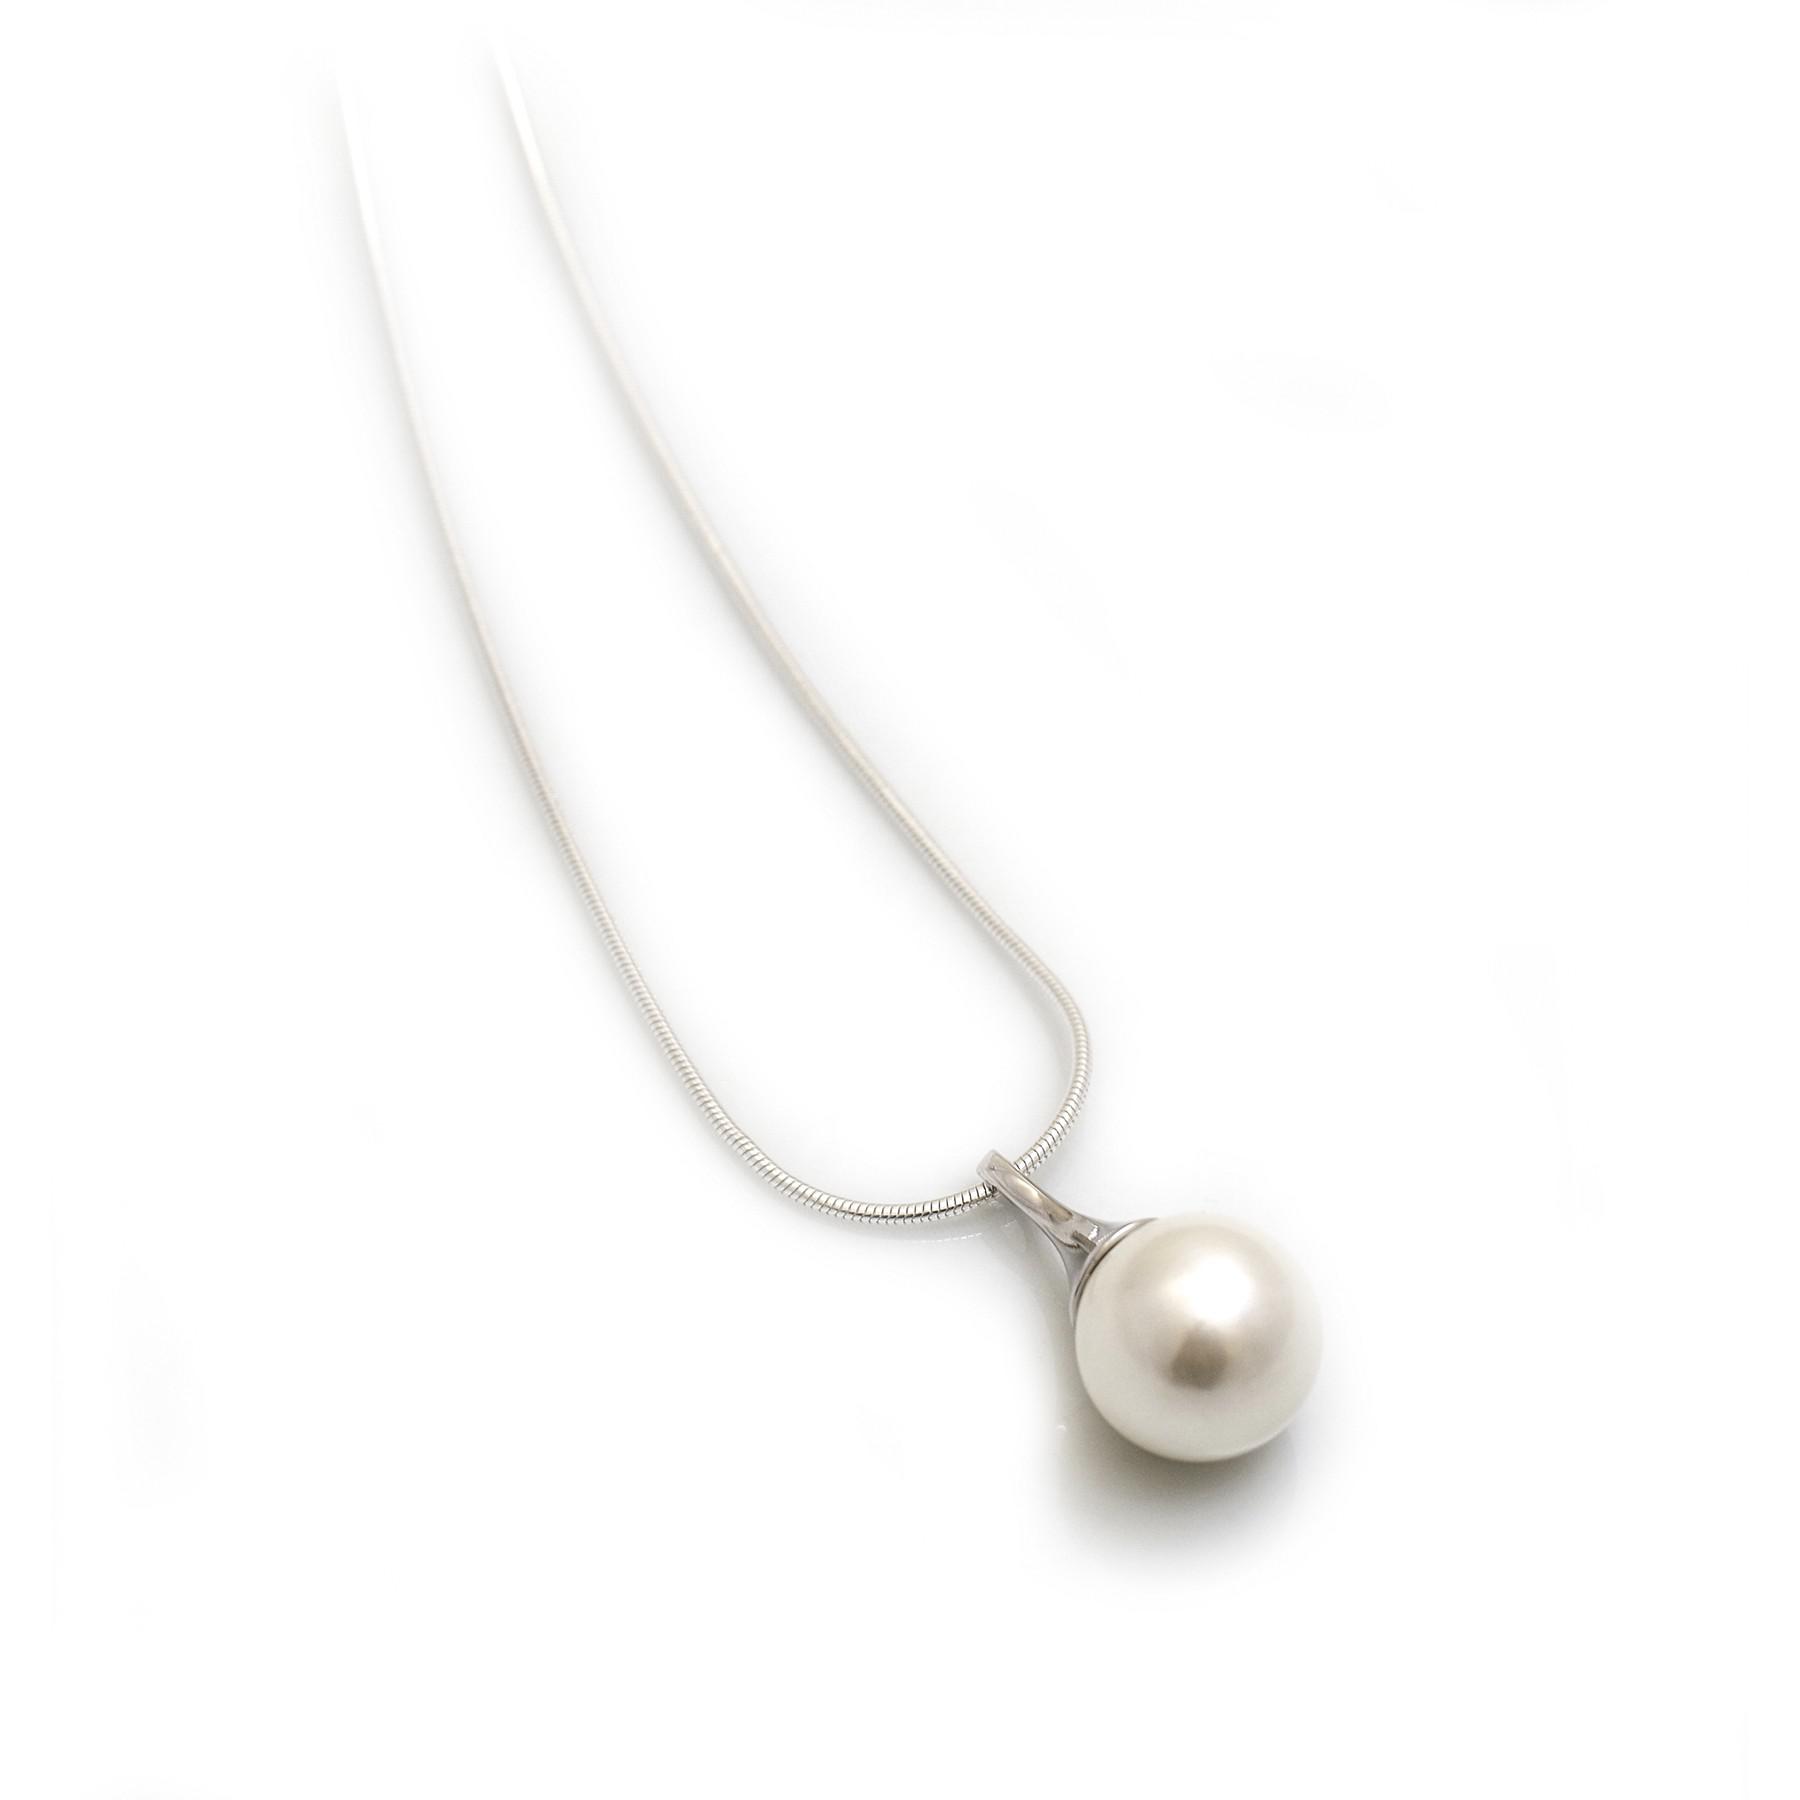 Pearl and teardrop necklace - TigerLily Jewellery